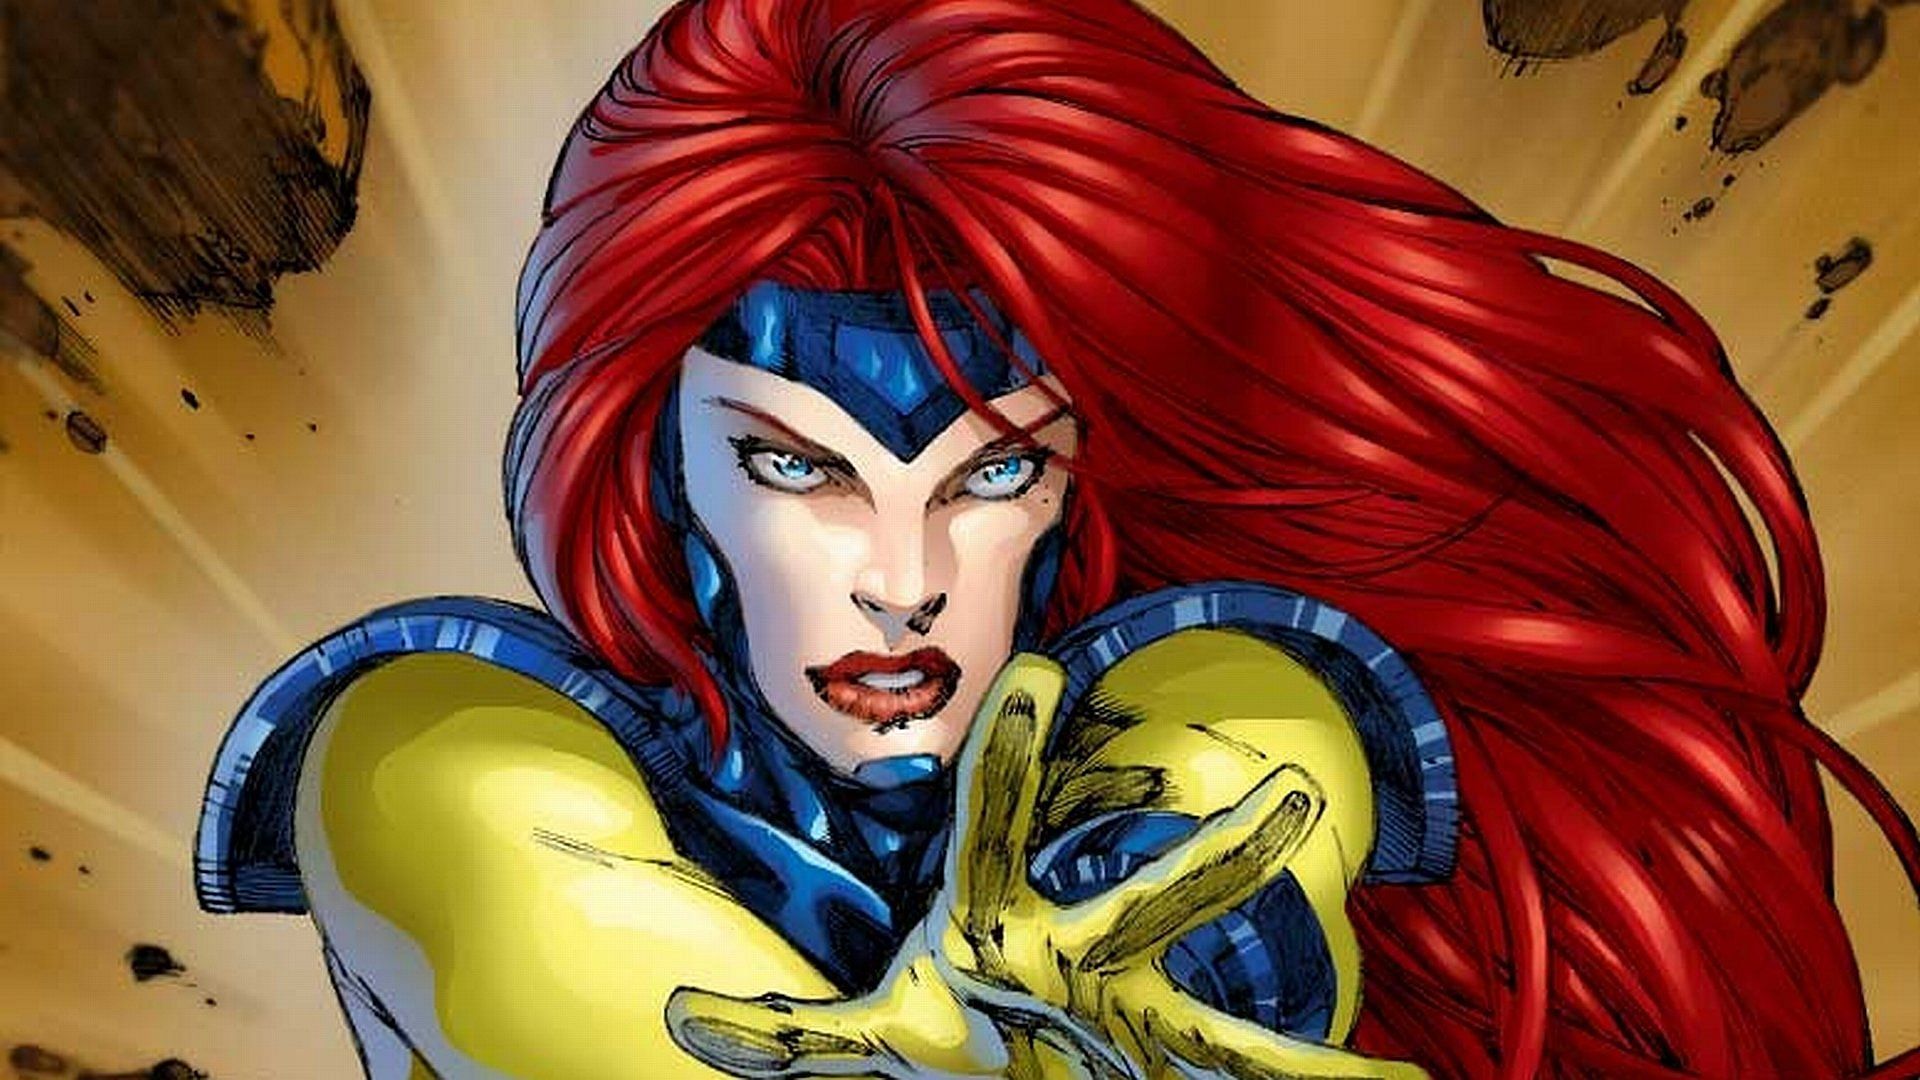 Jean Grey, also known as Phoenix, is a member of the X-Men and a powerful mutant with telekinetic and telepathic abilities. (Image Via Marvel)